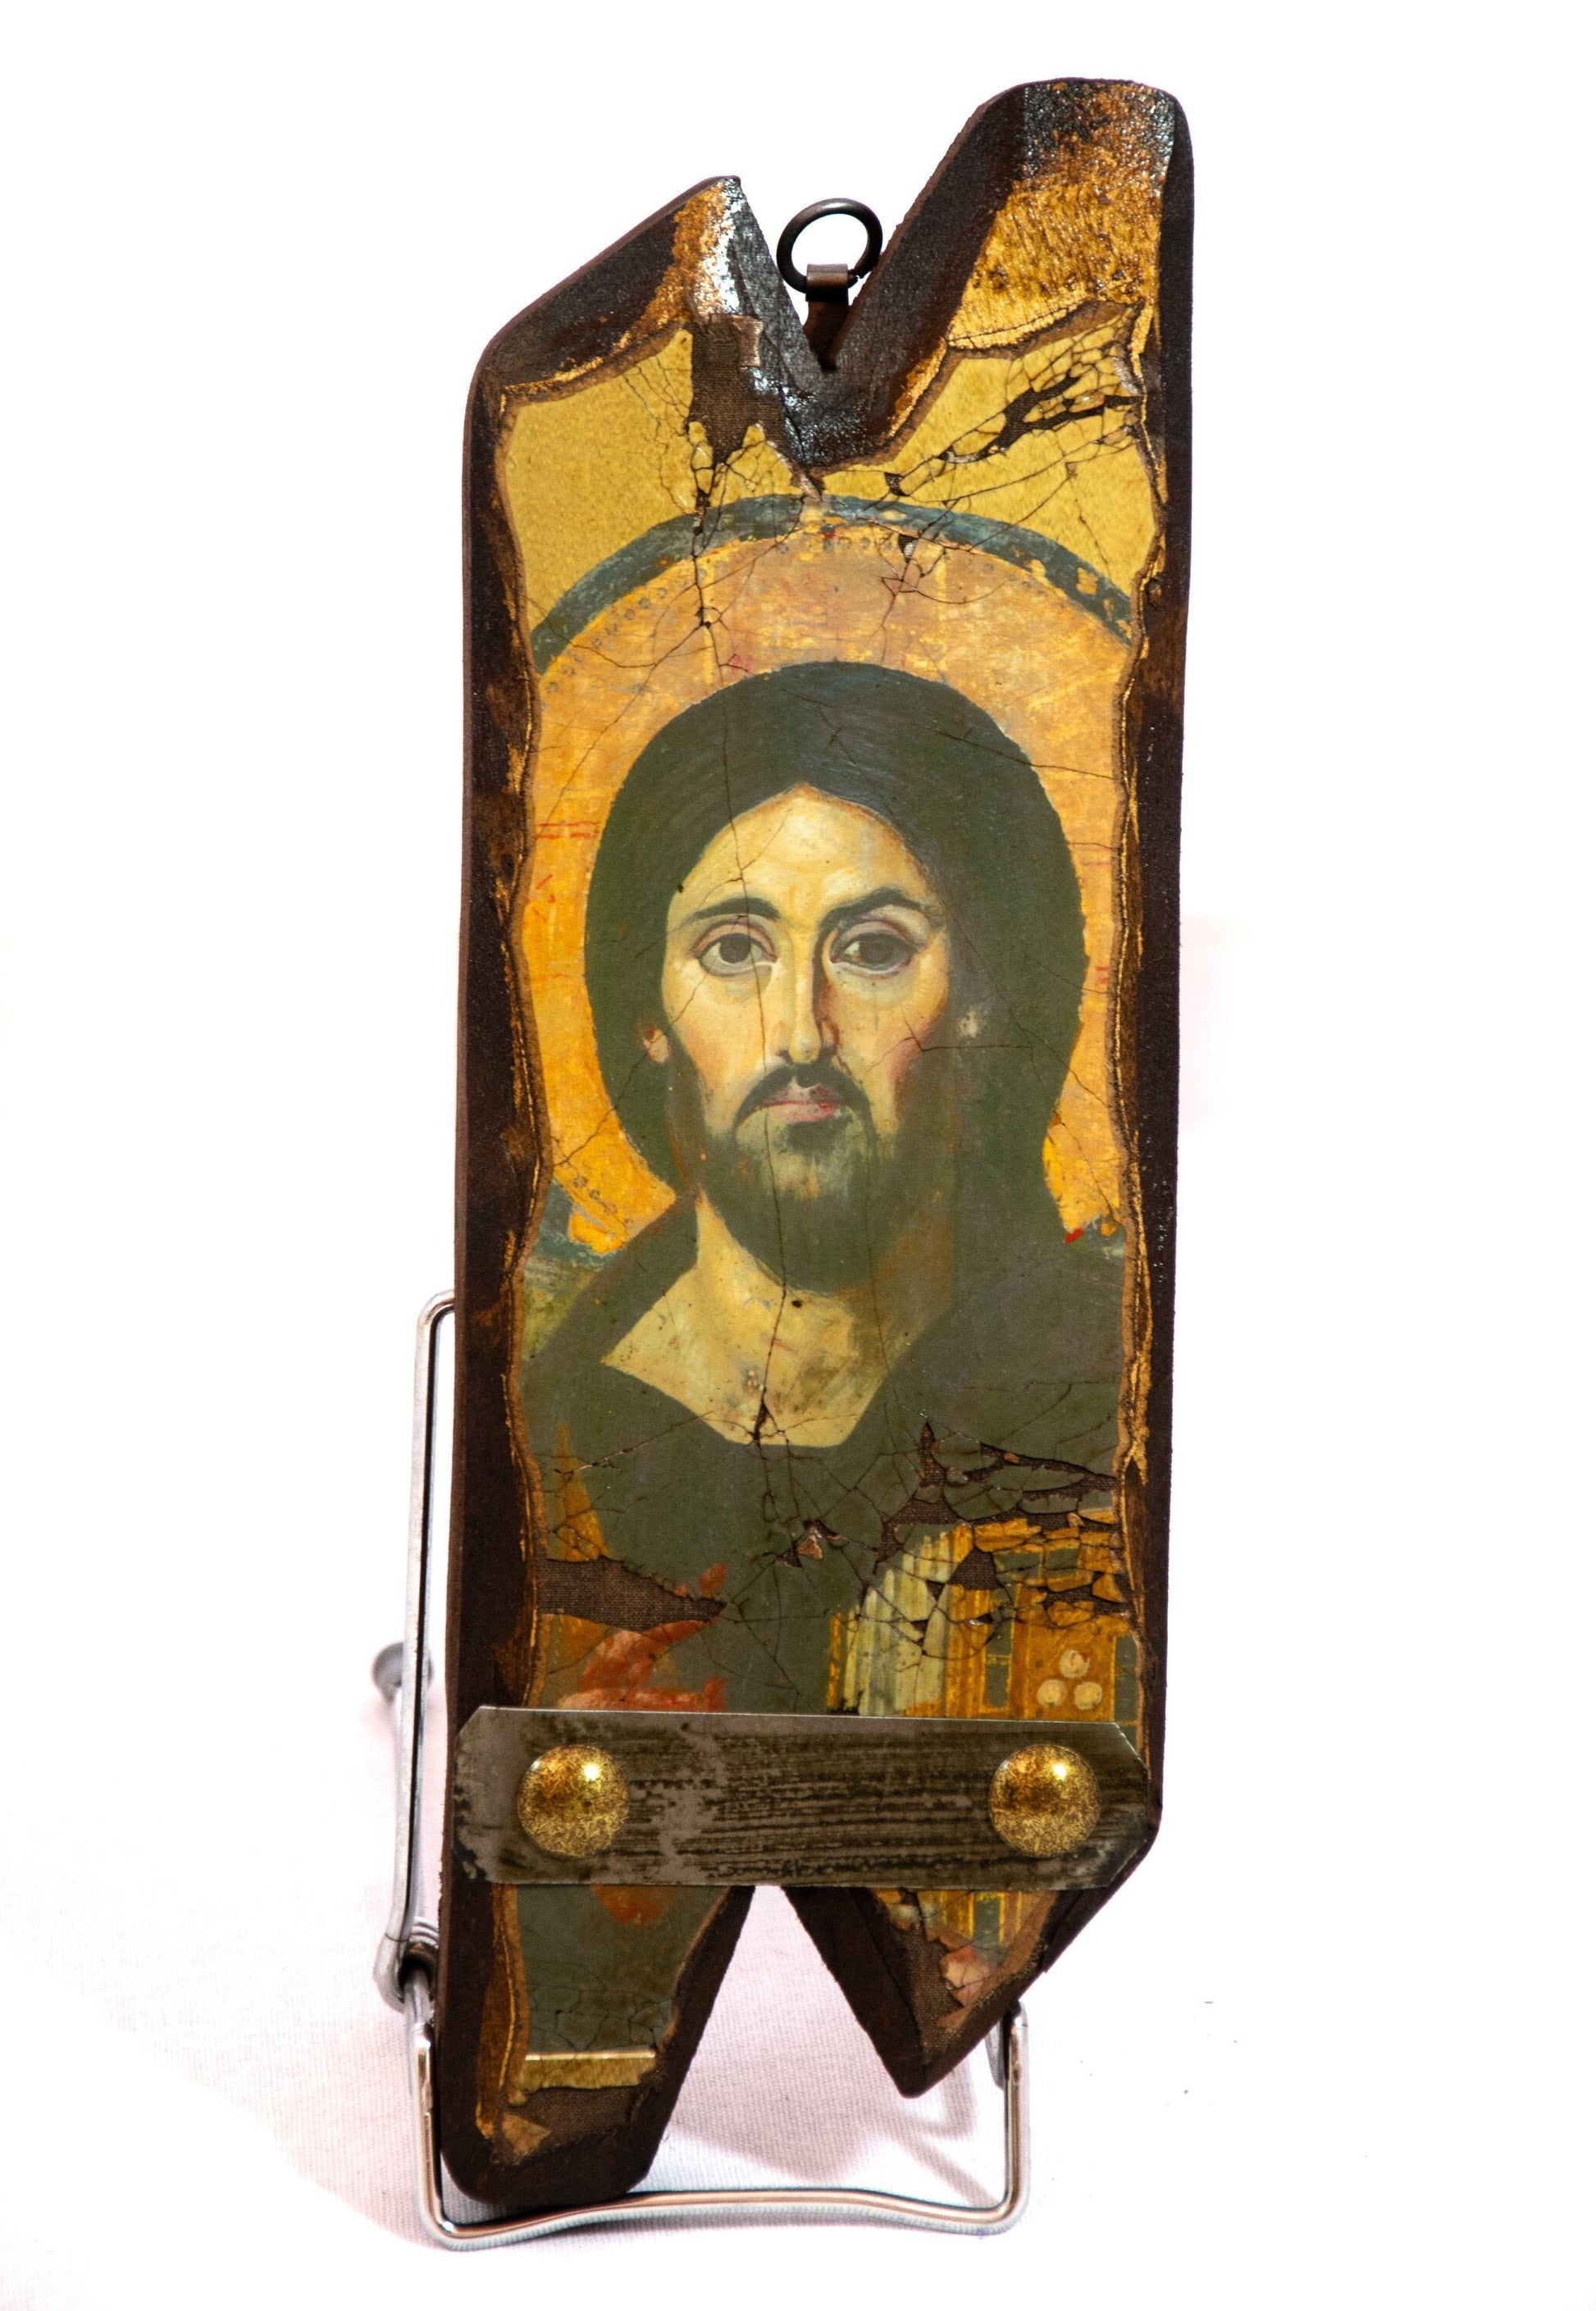 Jesus Christ icon, Handmade Greek Orthodox icon, Byzantine art wall hanging canvas icon of our Lord on wood plaque, religious decor TheHolyArt